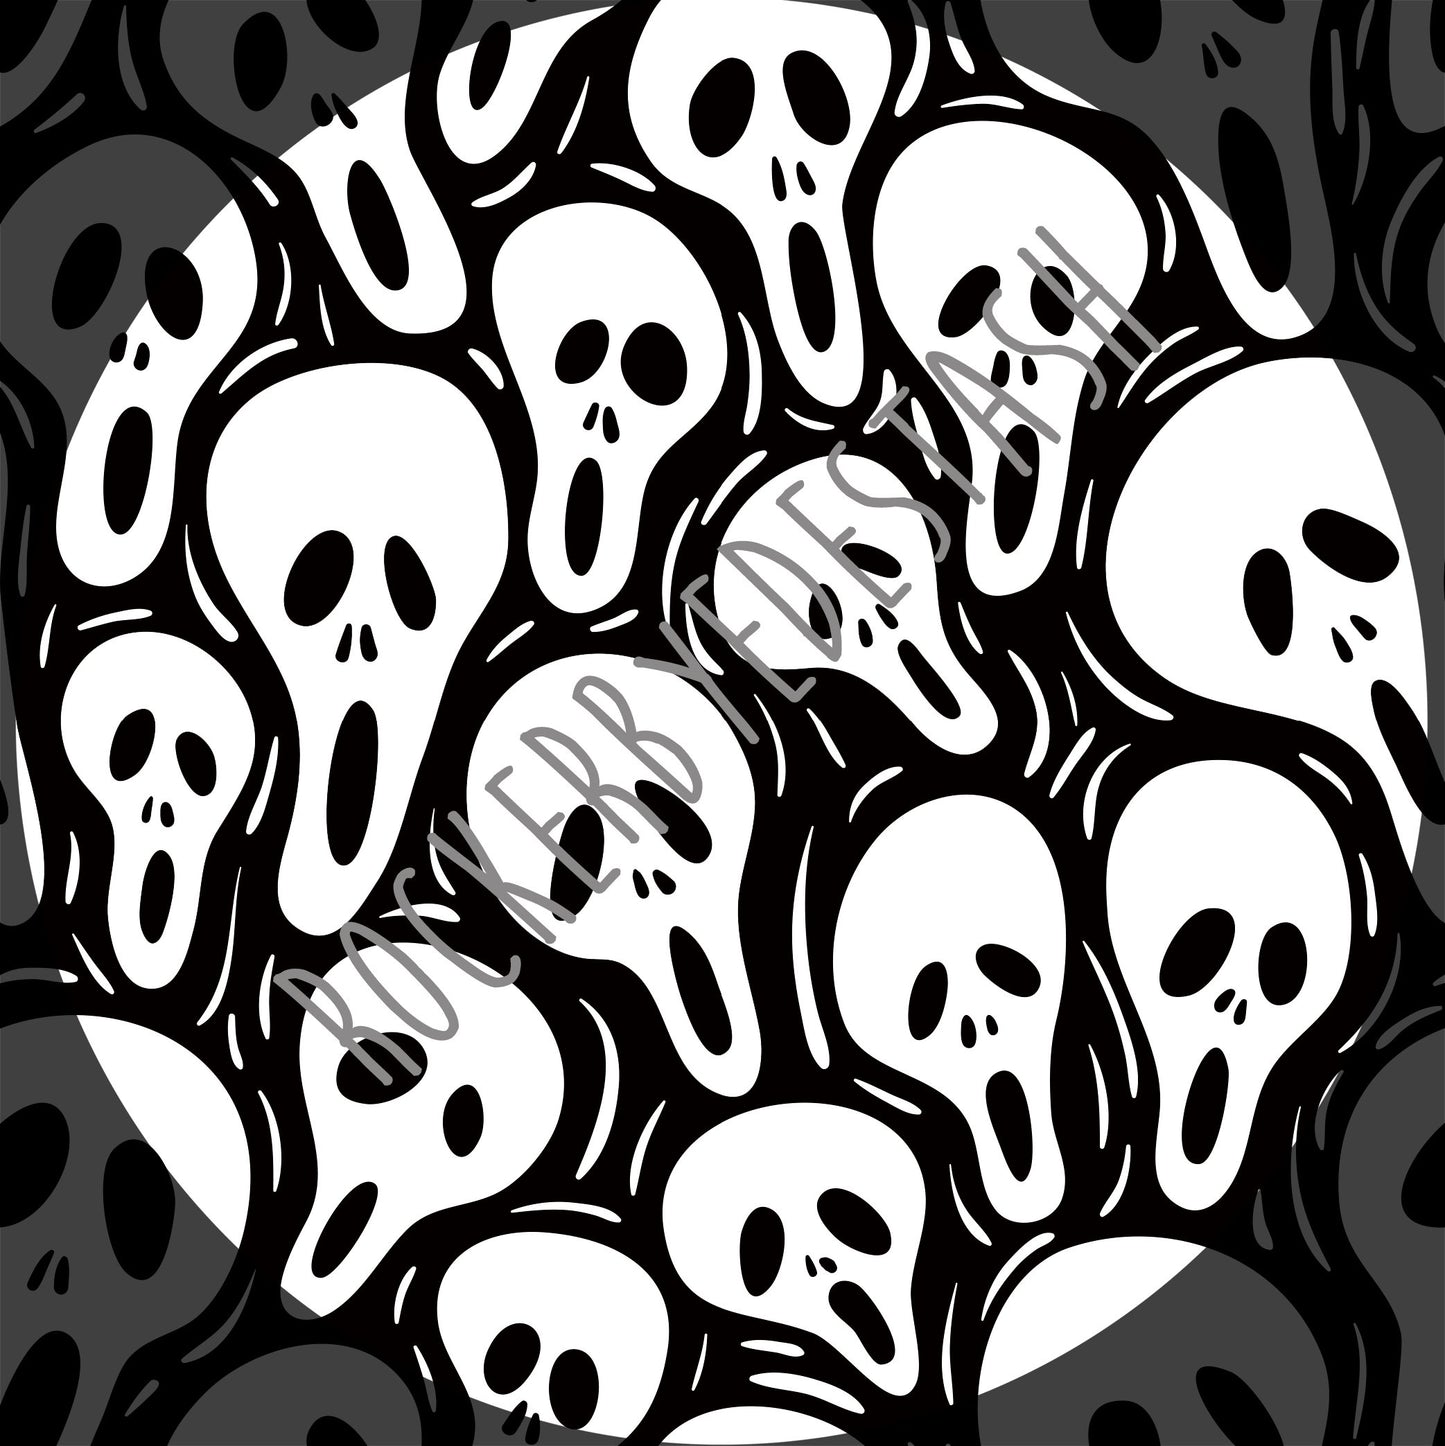 French Terry Retail Halloween Prints - Zombies, Bats, Boo's, Skulls and more